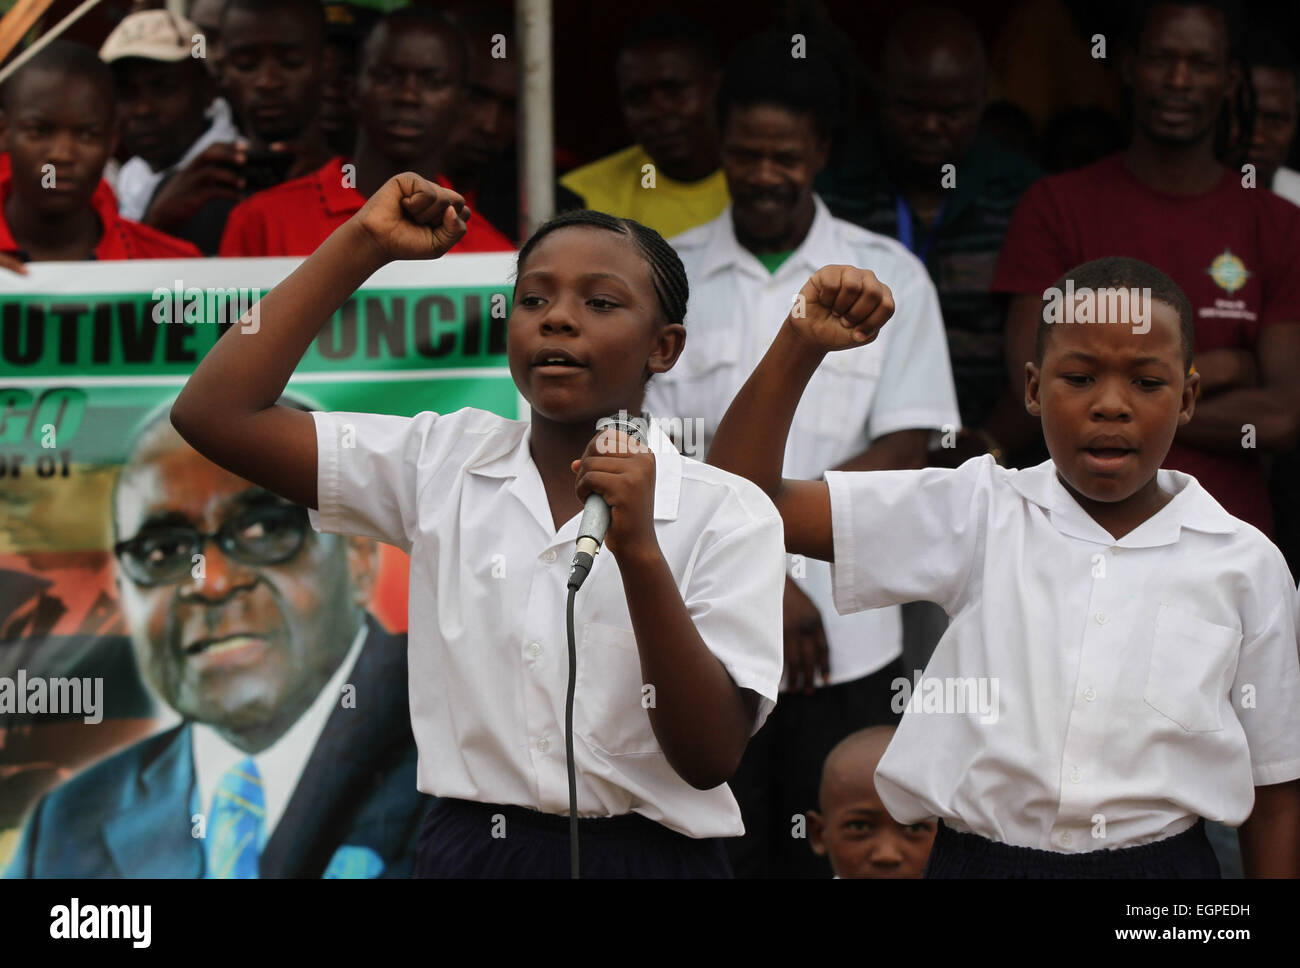 Victoria Falls, Zimbabwe. 28th February, 2015. Two students speak to show support at a public celebration held to mark the 91st birthday of Zimbabwean President Robert Mugabe in Victoria Falls, Zimbabwe, Feb. 28, 2015. Mugabe, who turns 91 this month, is the oldest leader in the world and one of the longest-serving African statesmen. Having ruled Zimbabwe for 35 years since independence, Mugabe was endorsed by the ruling ZANU-PF party as the sole candidate to contest at the age of 94 in the next presidential election in 2018. Credit:  Xinhua/Alamy Live News Stock Photo